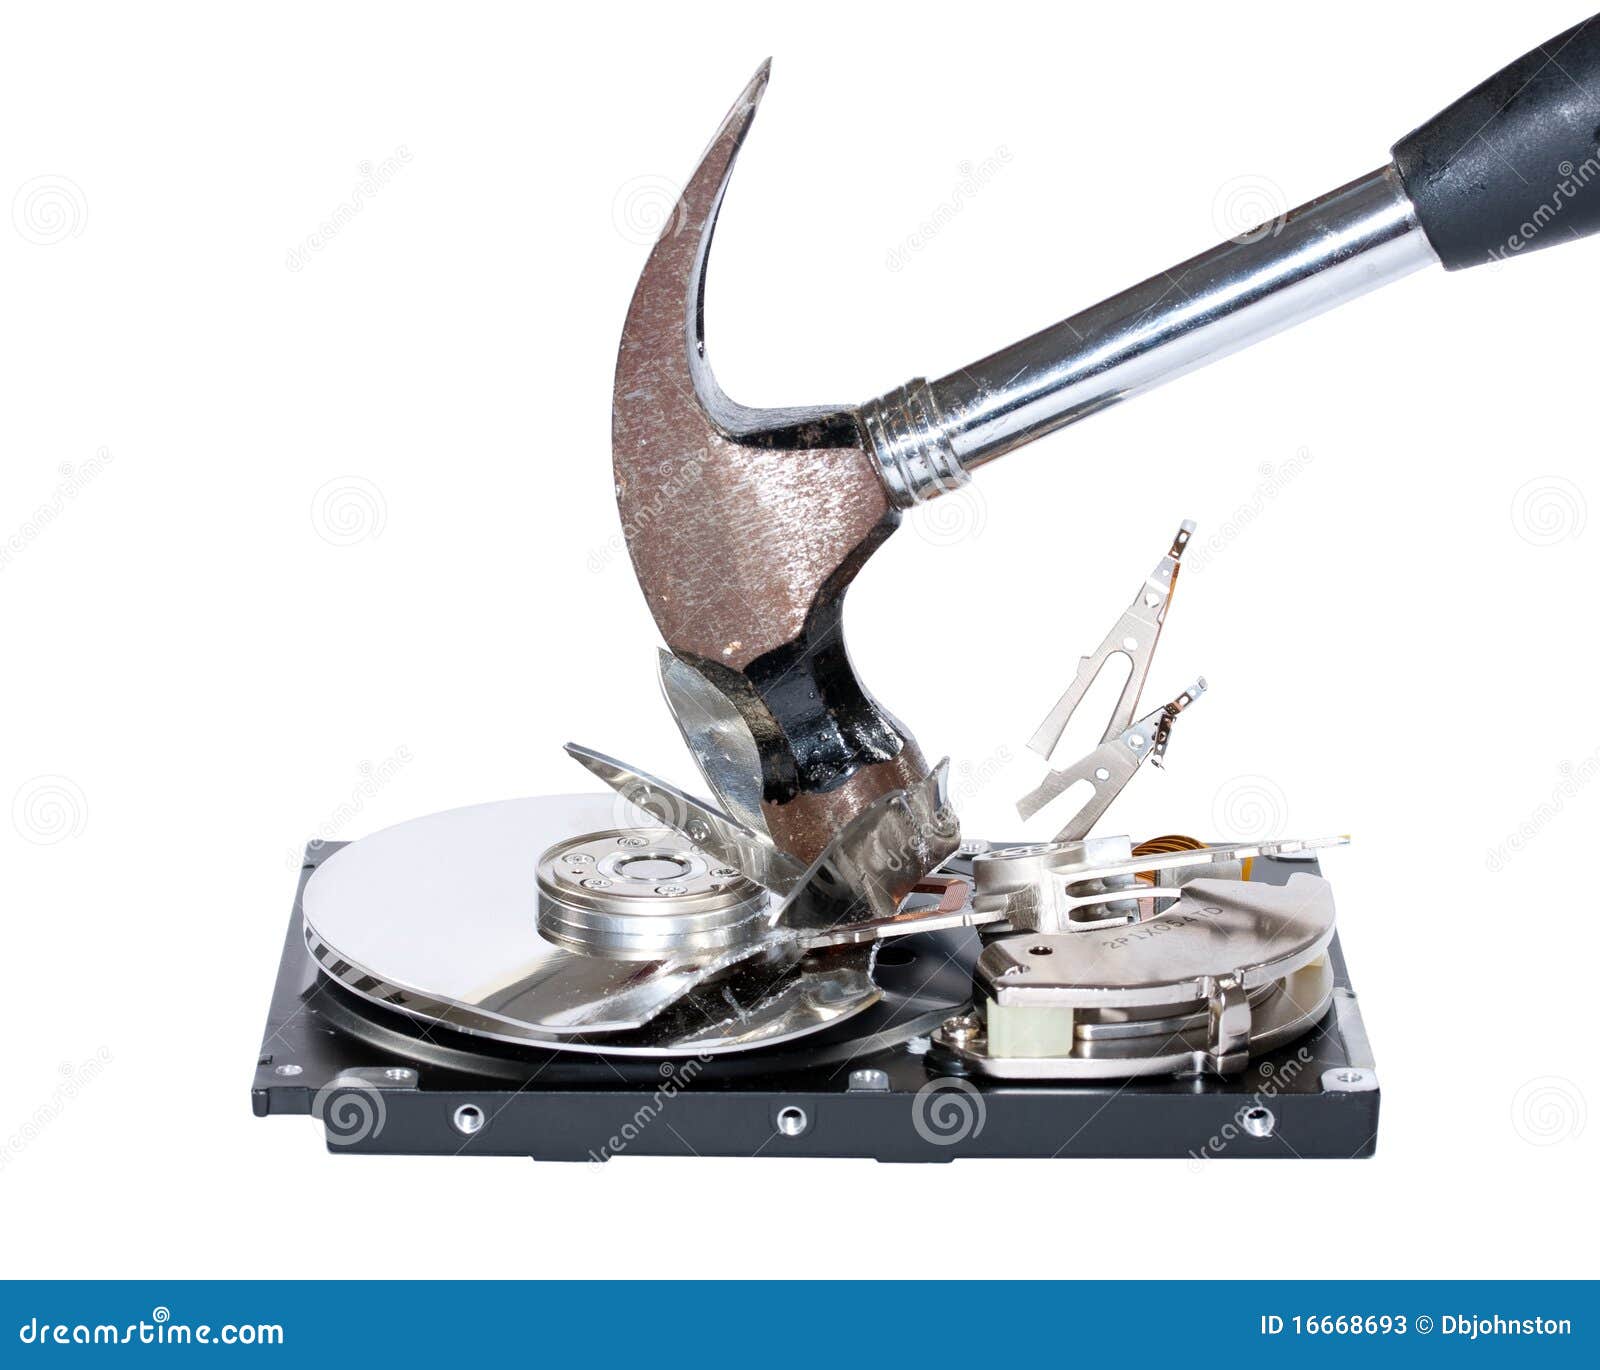 Top 100+ Images how to destroy a hard drive with a hammer Full HD, 2k, 4k